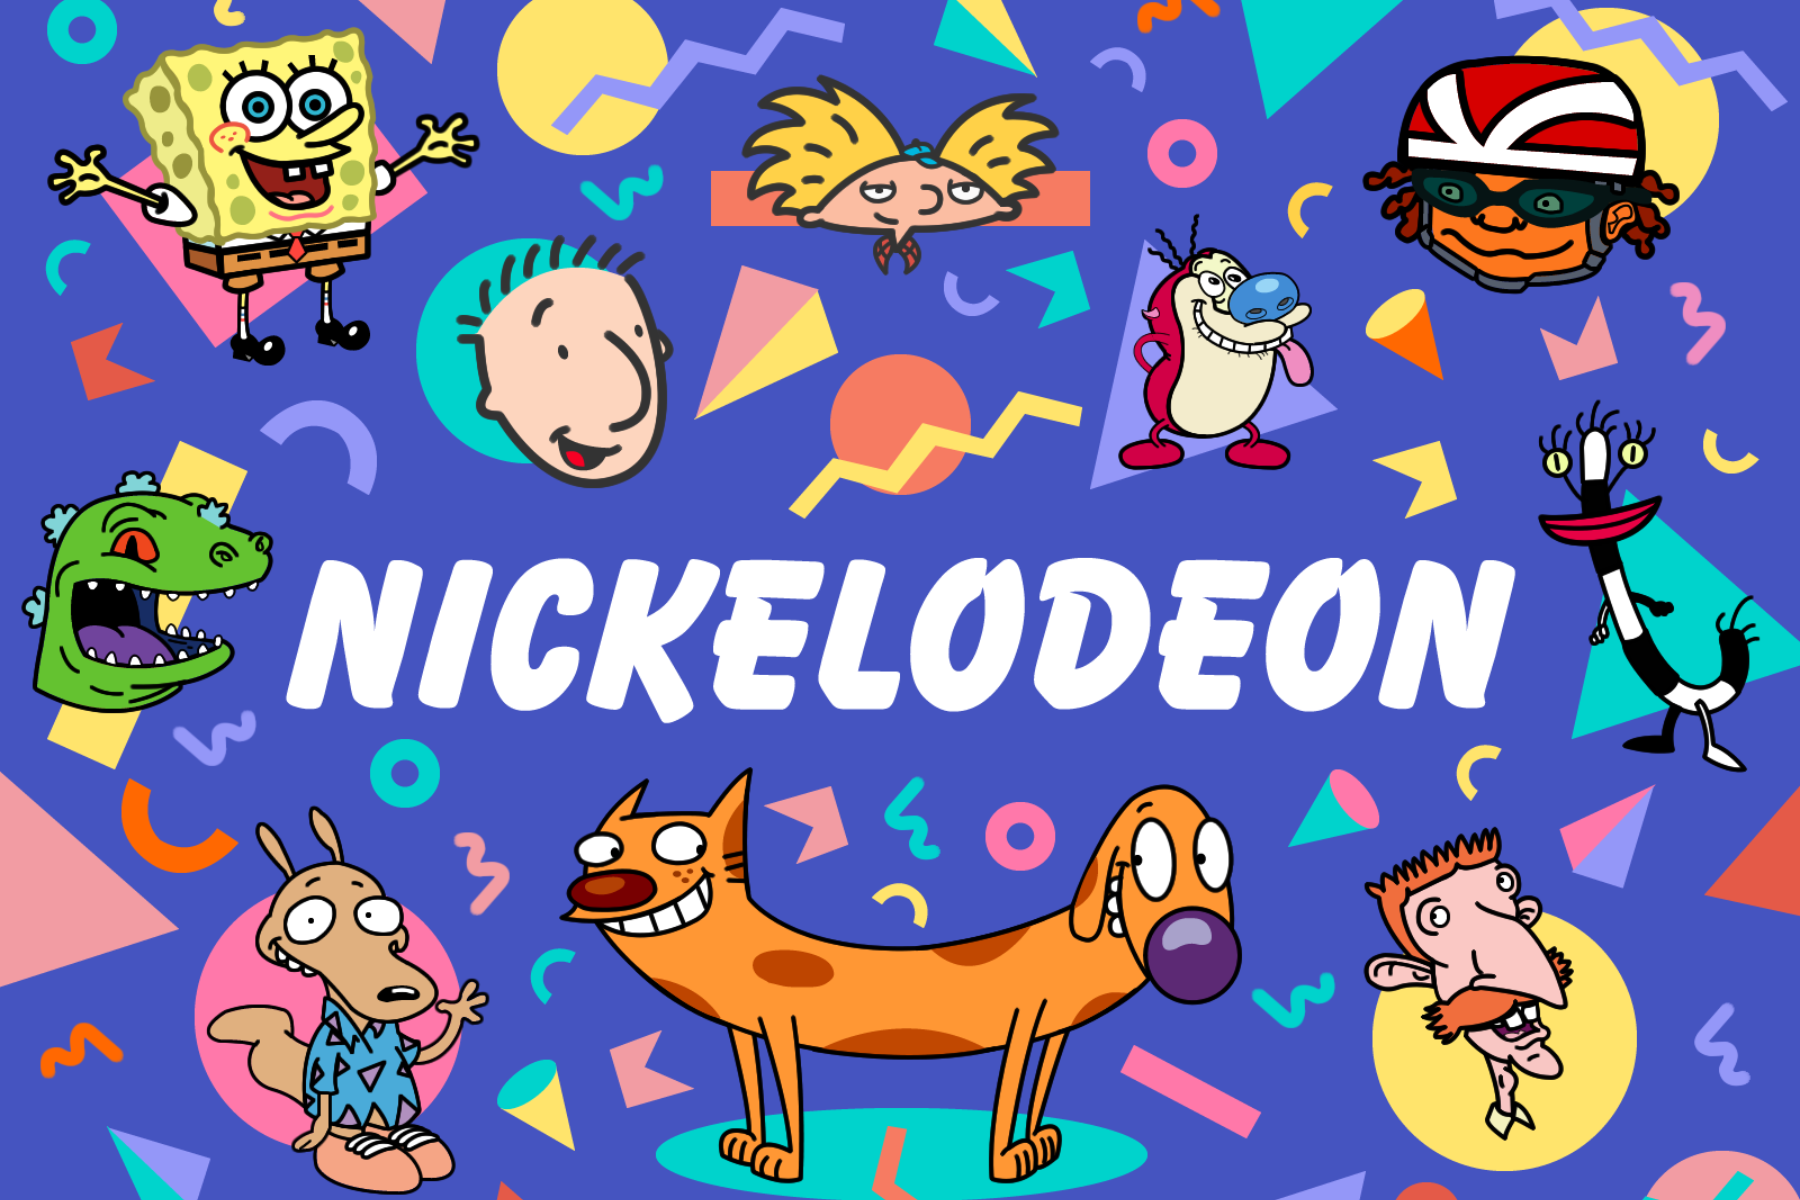 Can You Guess the 90’s Nickelodeon Show from the Opening? (type in answer)